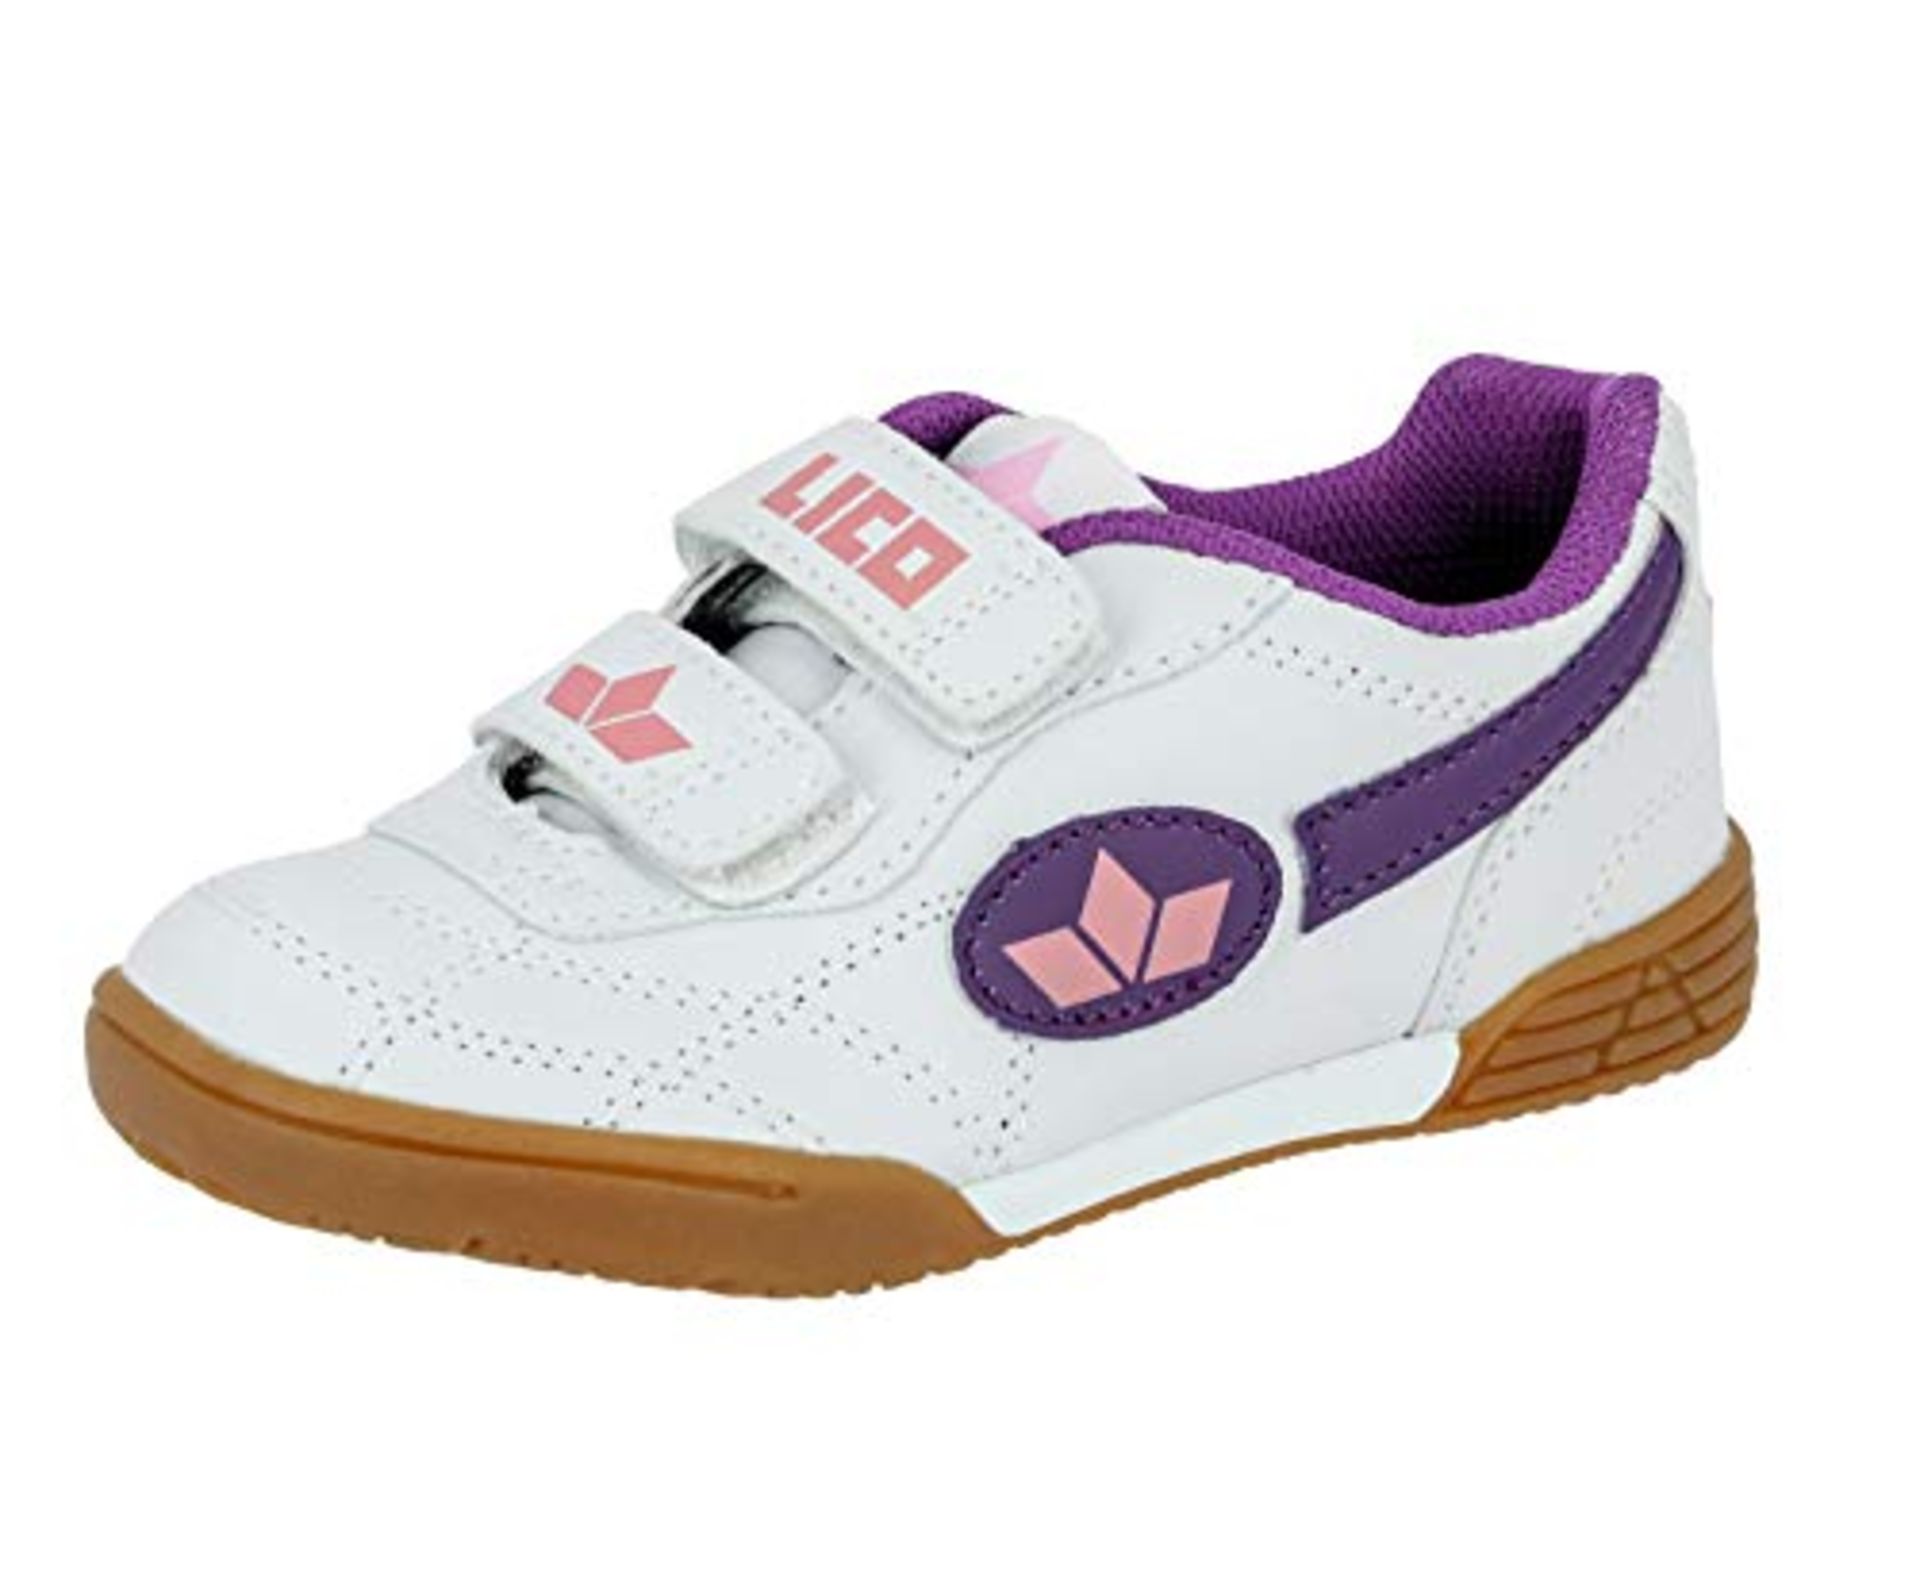 BRAND NEW Lico Girls’ Bernie V Multisport Indoor Shoes, Purple / Pink, Bianco (weiss/lila), 6 UK RRP - Image 3 of 4